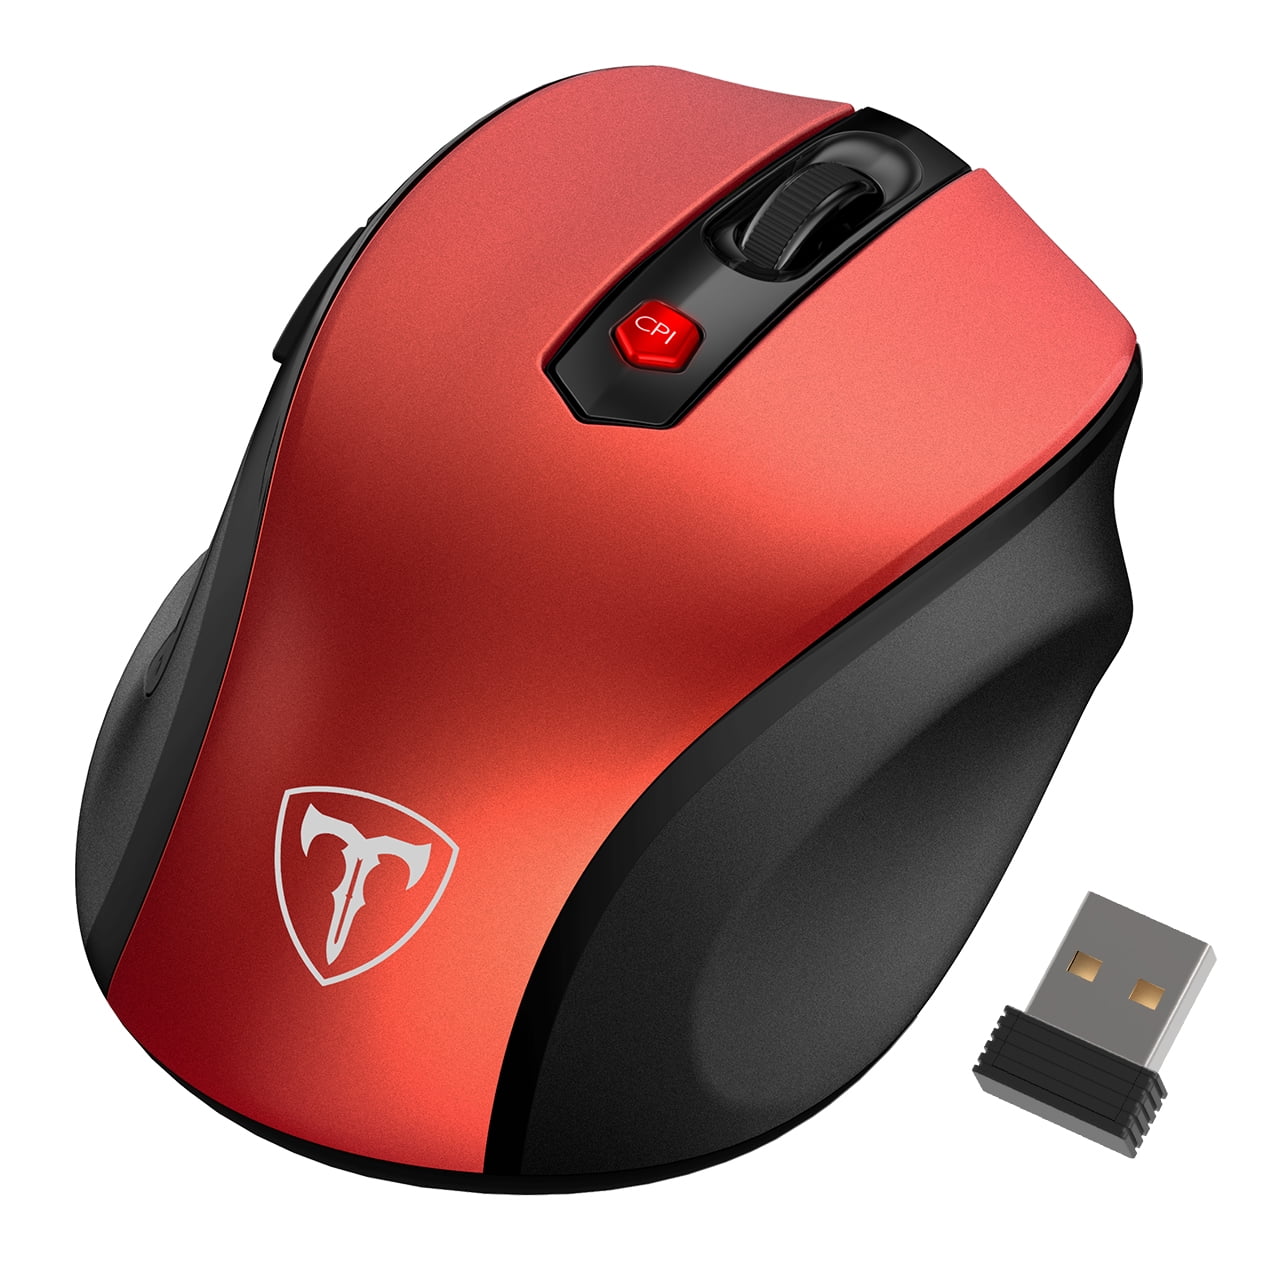 VicTsing 2.4G Wireless Mouse, USB Cordless Computer Mouse W/800-2400 DPI,  Ergo Grips, 16 Months Battery, Auto-sleep Mode, Portable Gaming Mouse for PC  Mac Chromebook - Red 